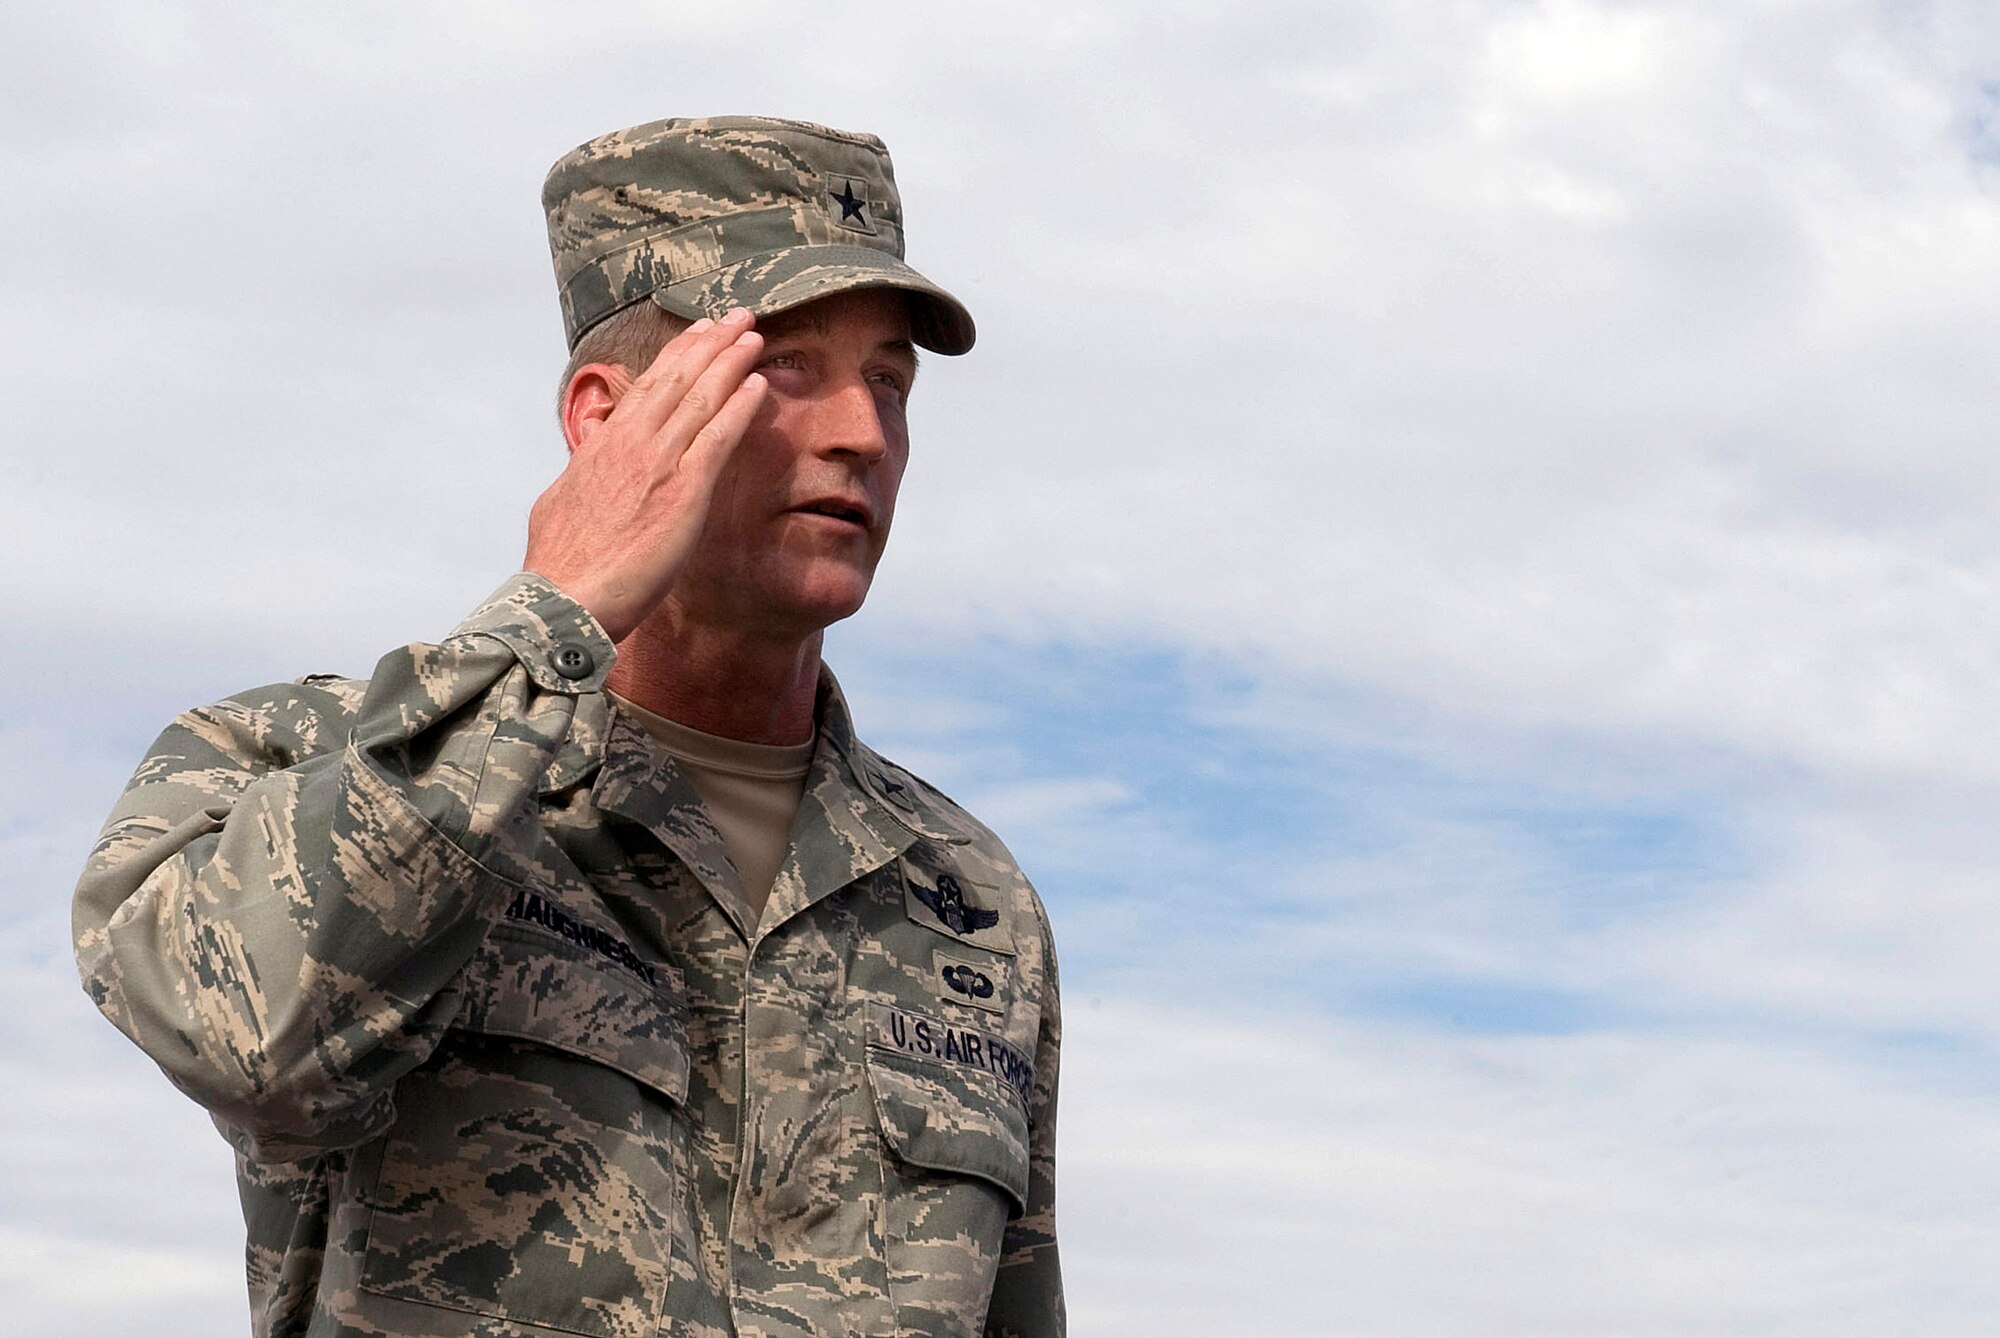 NELLIS AIR FORCE BASE, Nev.-- Brig. Gen. Terrence O'Shaughnessy, the new 57th Wing commander, renders his first salute as commander at the 57th Wing change of command ceremony July 16. The 57th Wing is responsible for 38 squadrons at 12 installations, constituting the Air Force's most diverse flying wing, flying and maintaining more than 130 aircraft. The 57th Wing also oversees the U.S. Air Force Weapons School; U.S. Air Force Air Demonstration Squadron, the Thunderbirds; and the Red Flag and Green Flag exercises. (U.S. Air Force Photo by Airman 1st Class Brett Clashman)
